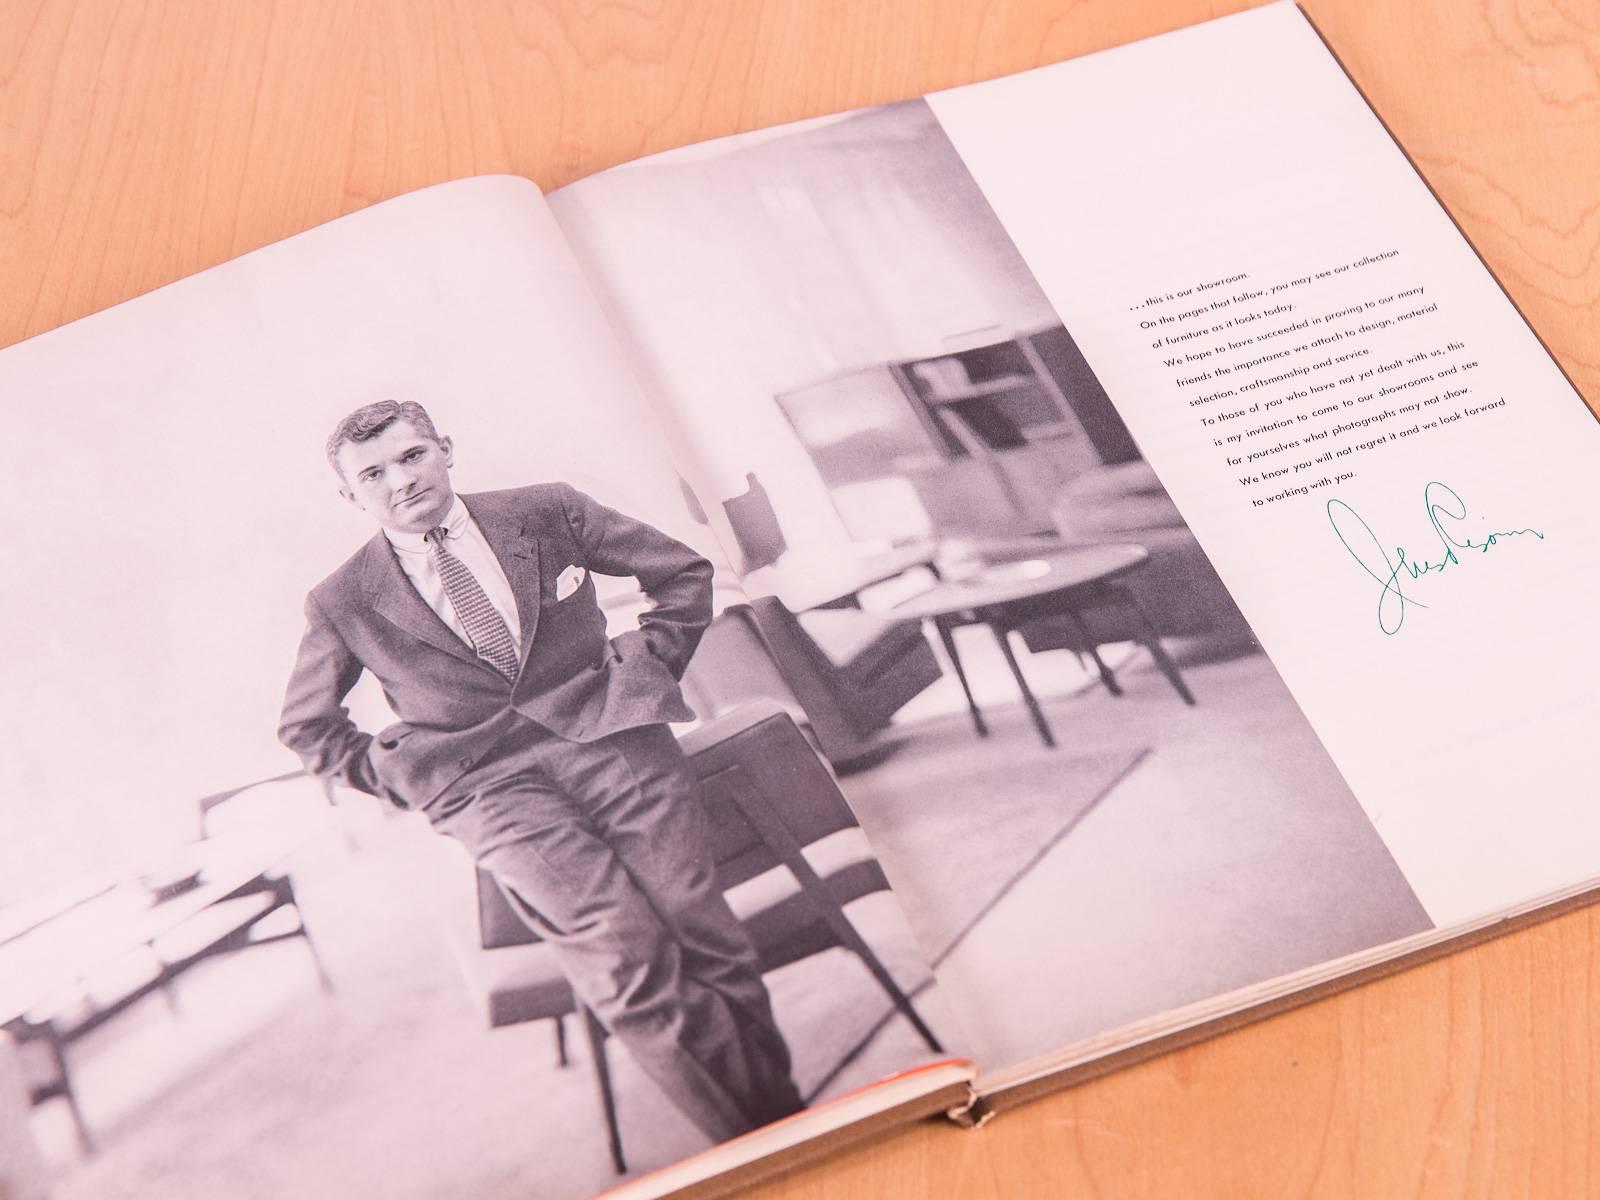 Rare, out of print, self-published catalog for the Jens Risom showroom in 1955. Includes a wonderful portrait of the late designer in the intro profile. Photographs shot by Richard Avedon. Contains the often missing, delicate glycine dust jacket